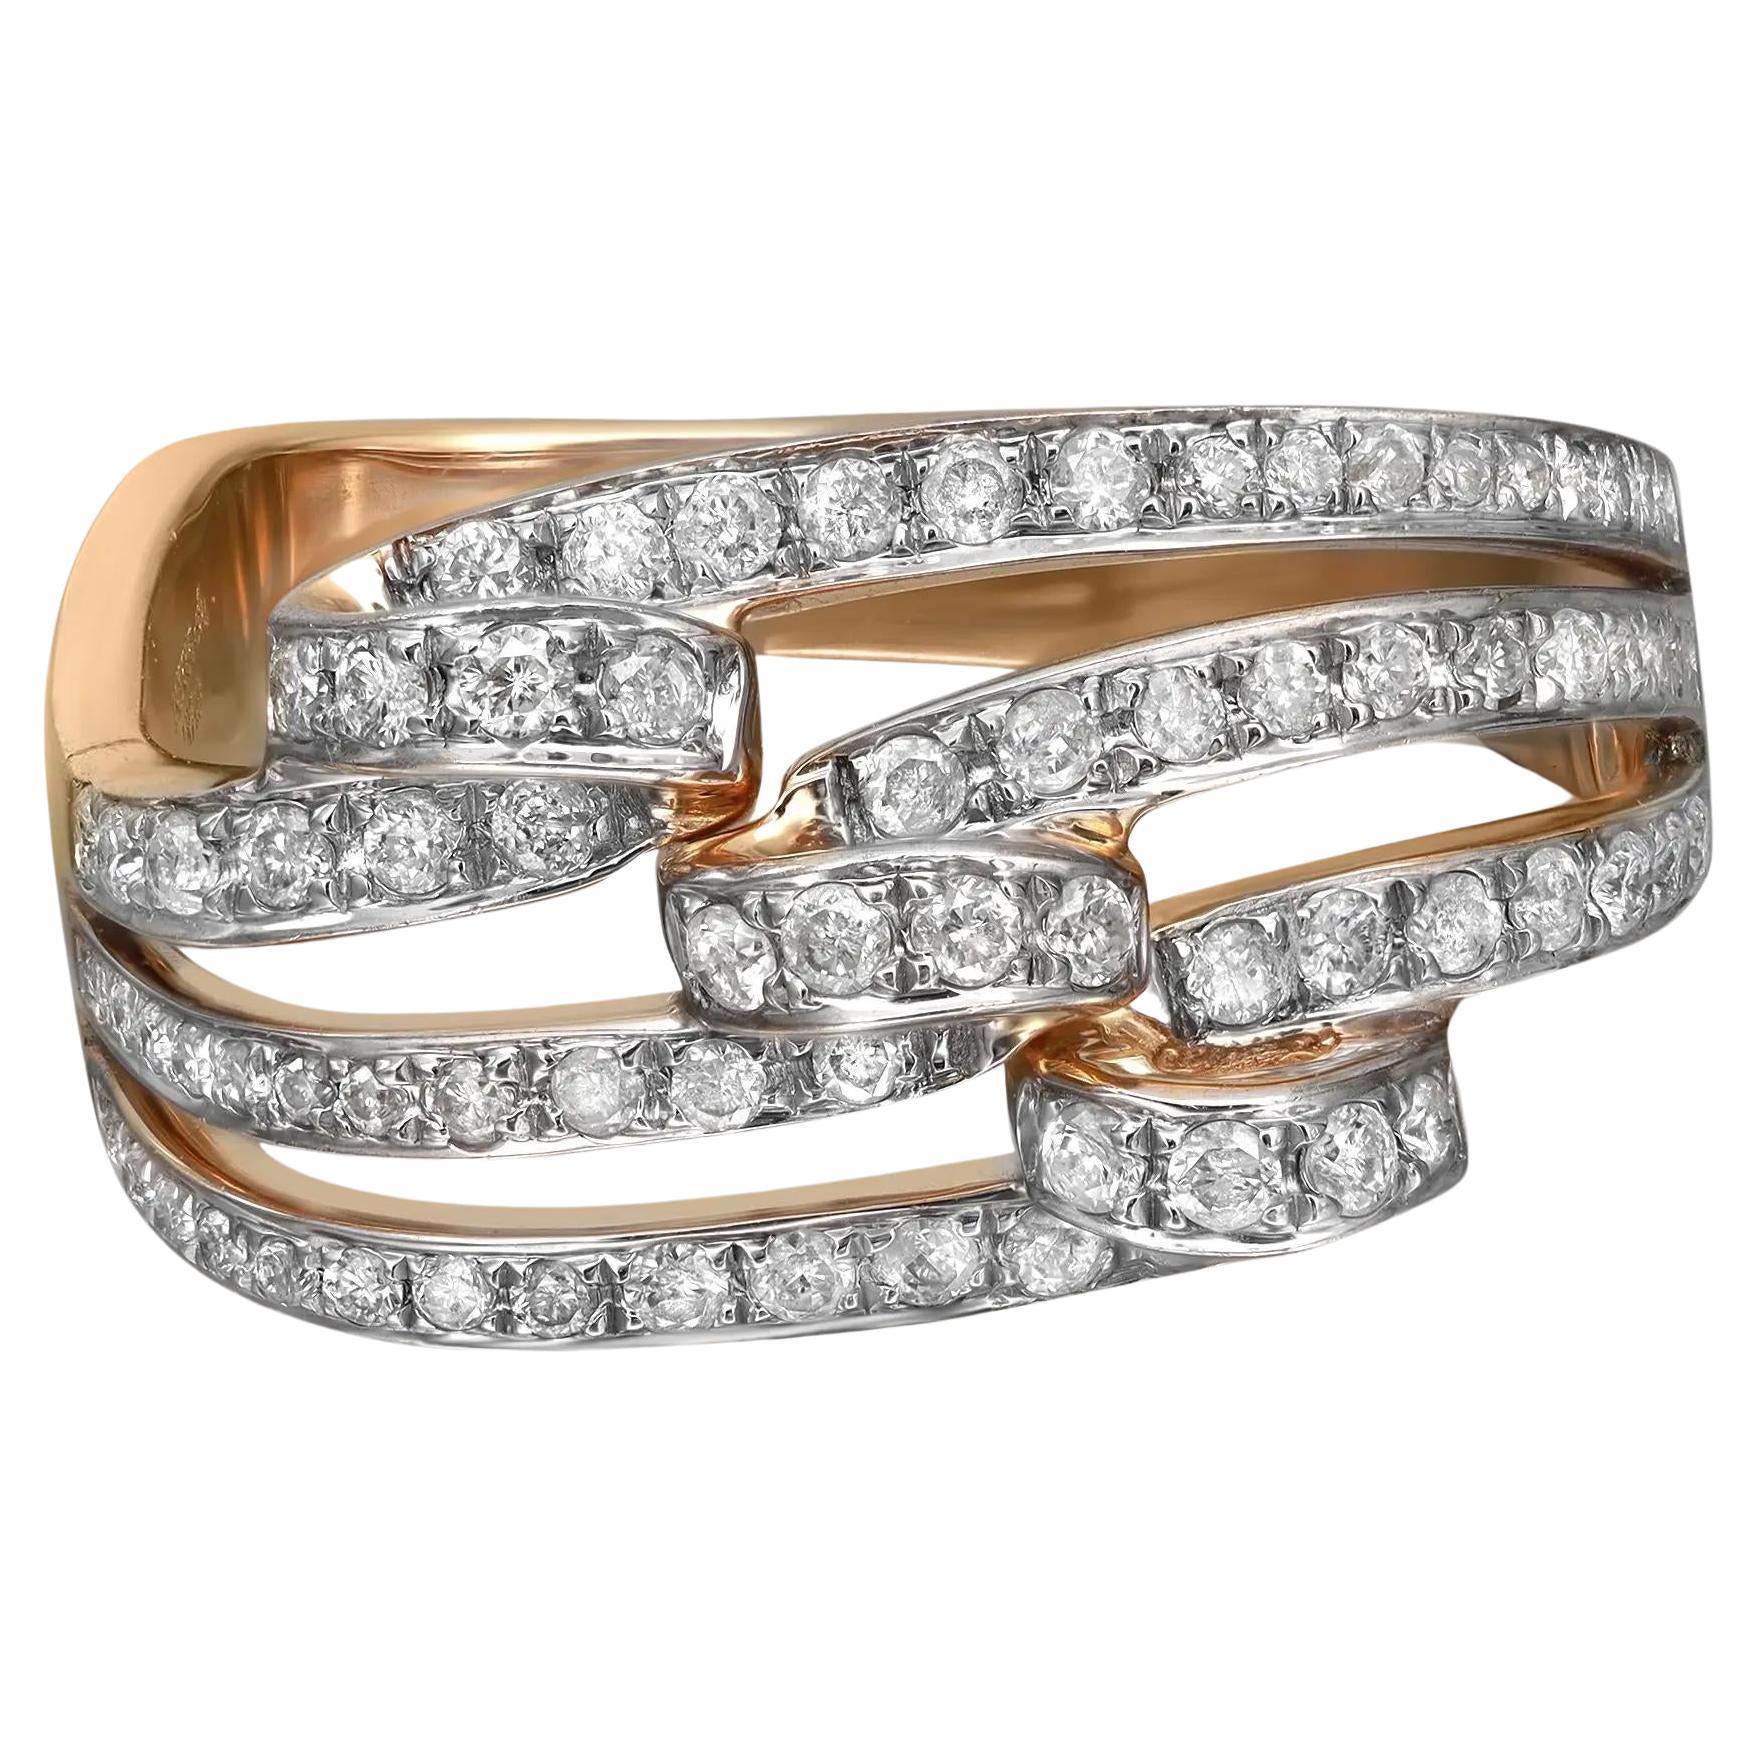 0.55Cttw Round Cut Diamond Ladies Square Cocktail Ring 14K Yellow Gold Size 7.5 For Sale